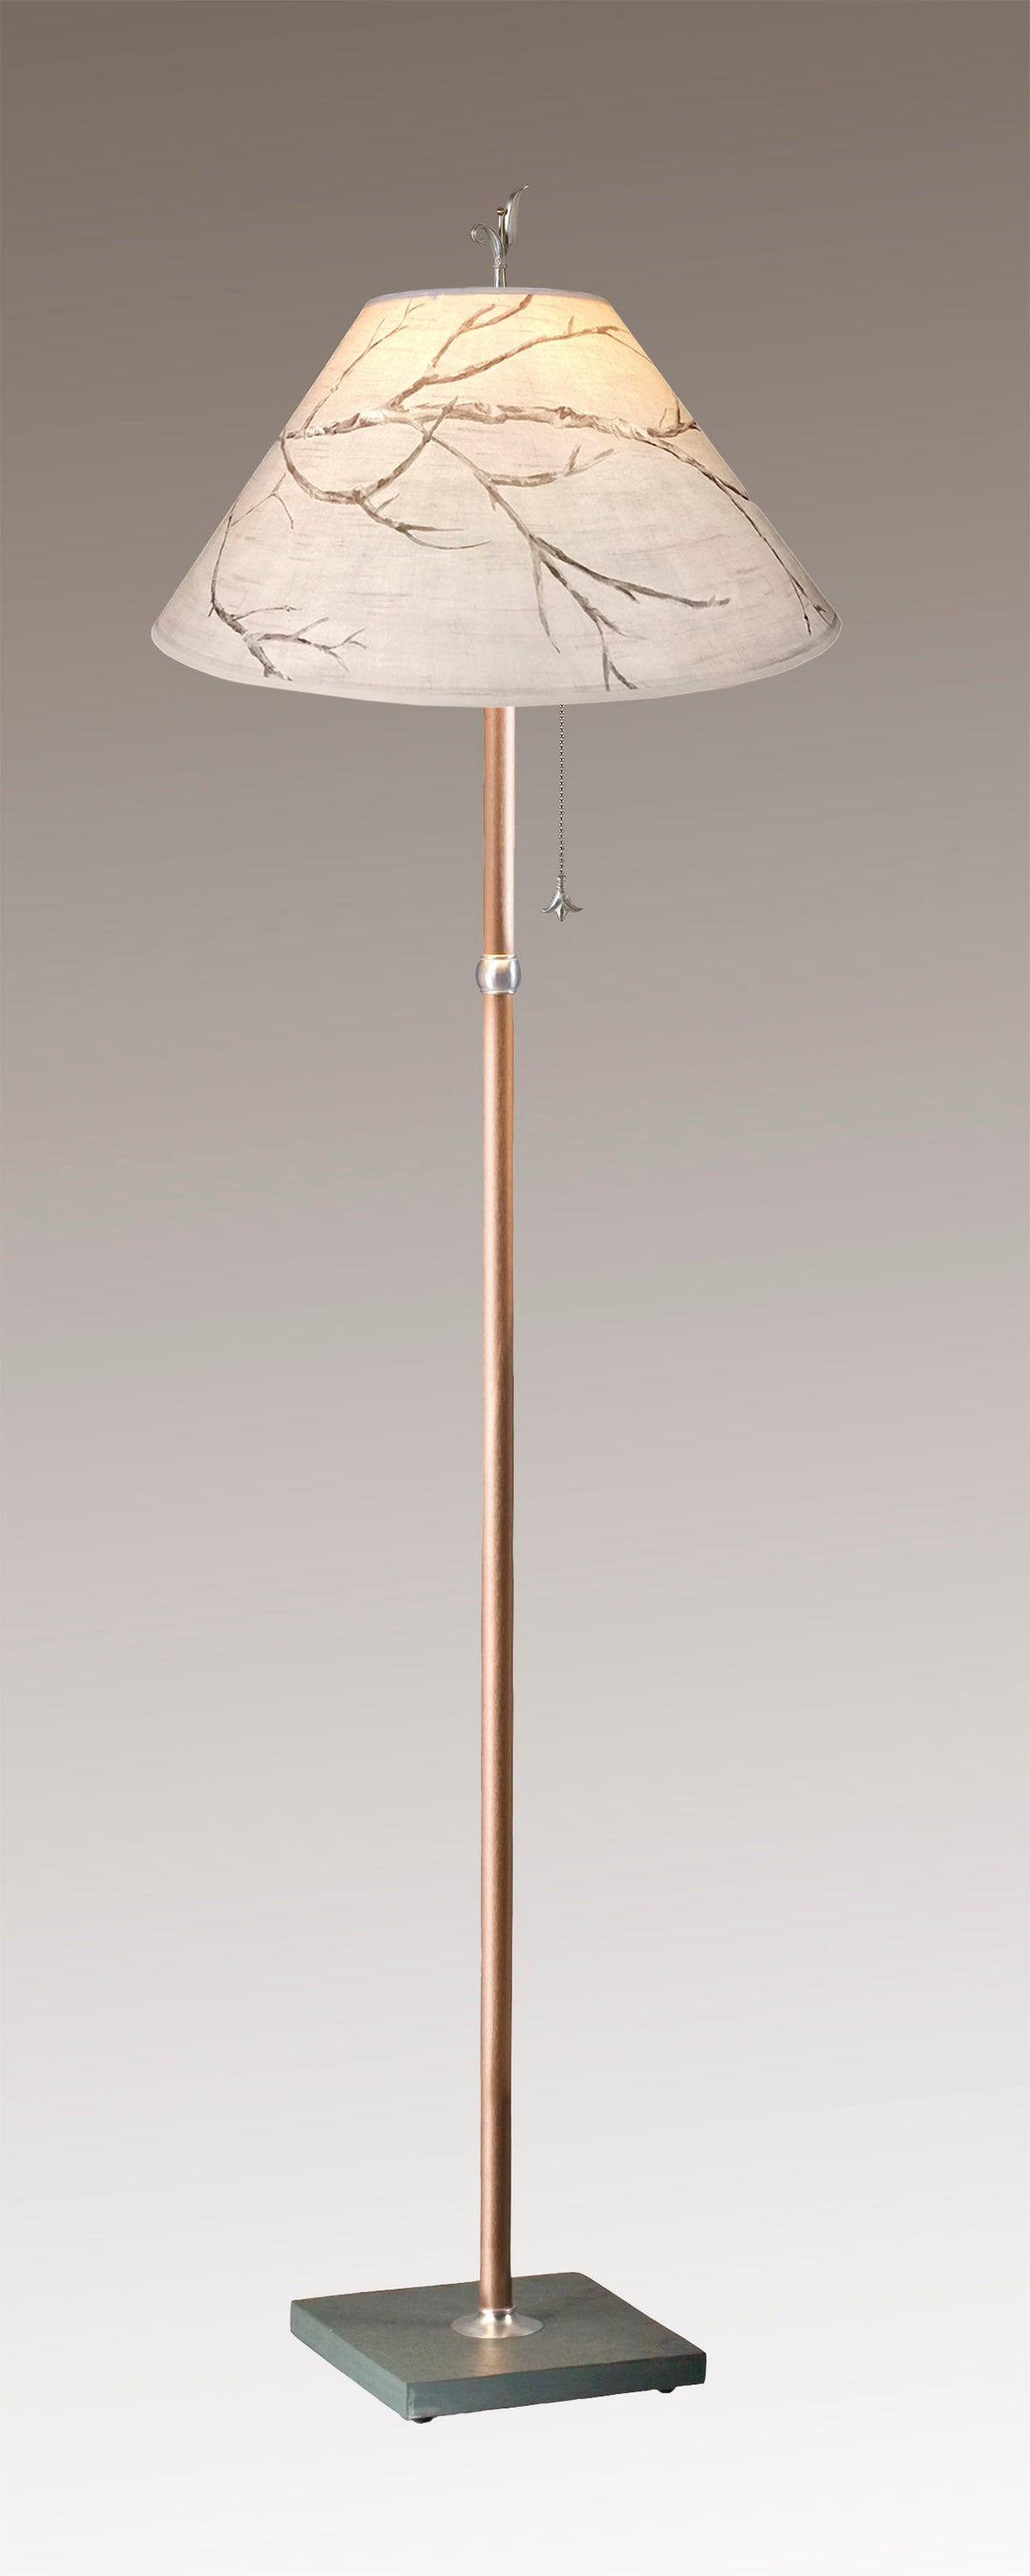 Janna Ugone &amp; Co Floor Lamps Copper Floor Lamp with Large Conical Shade in Sweeping Branch